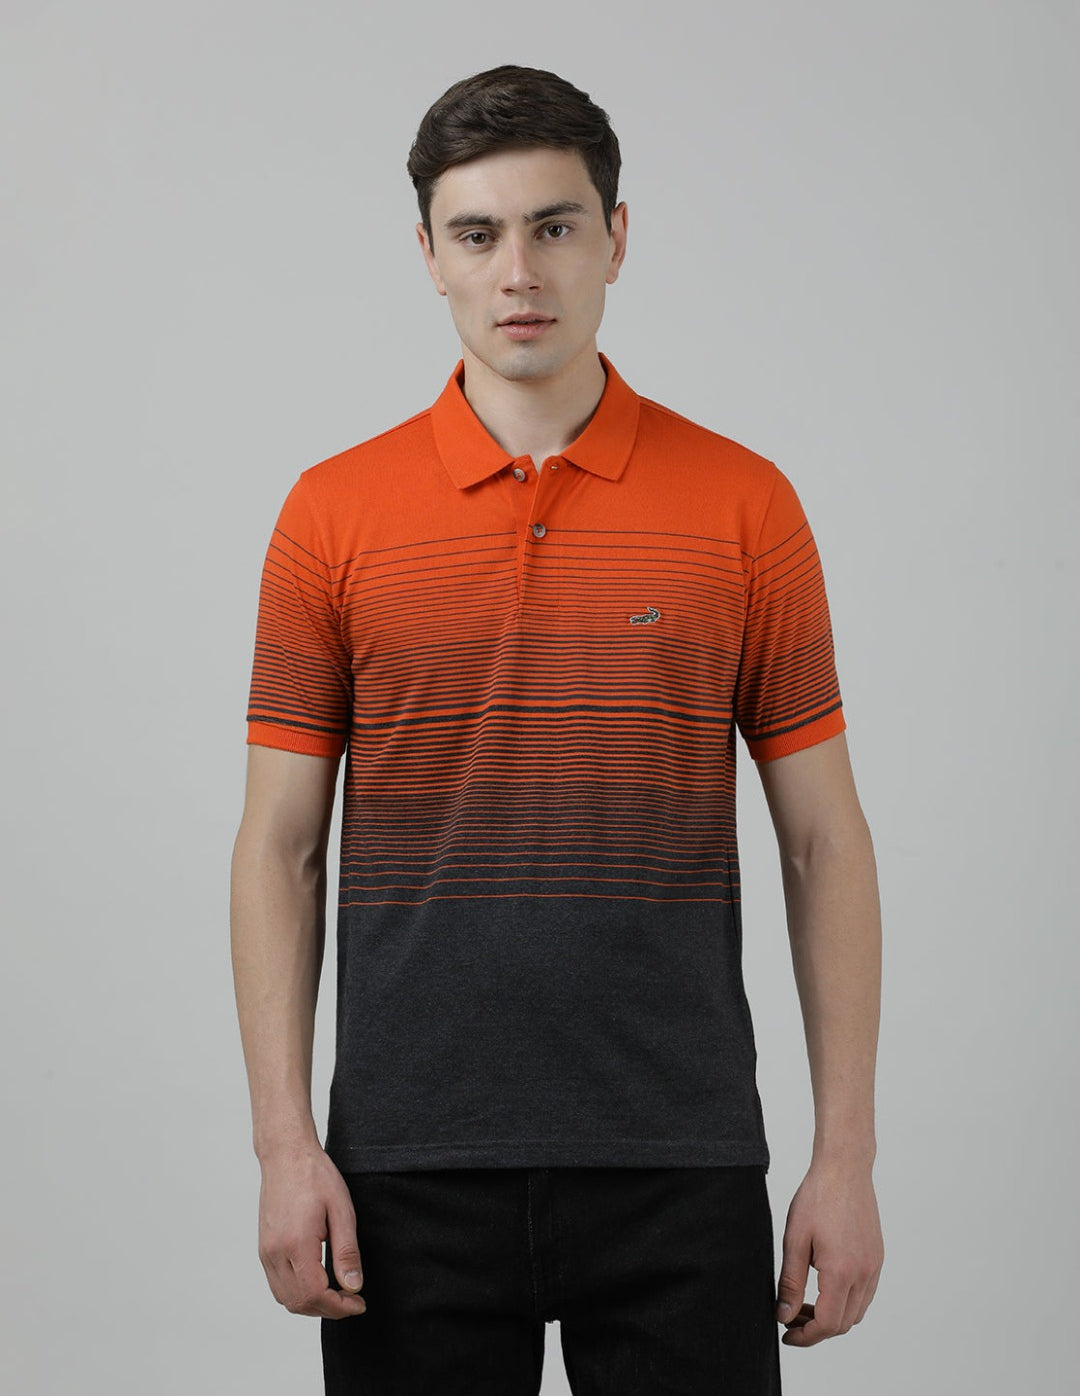 Casual Orange T-Shirt Half Sleeve Slim Fit Jersey Engineering Stripe with Collar for Men